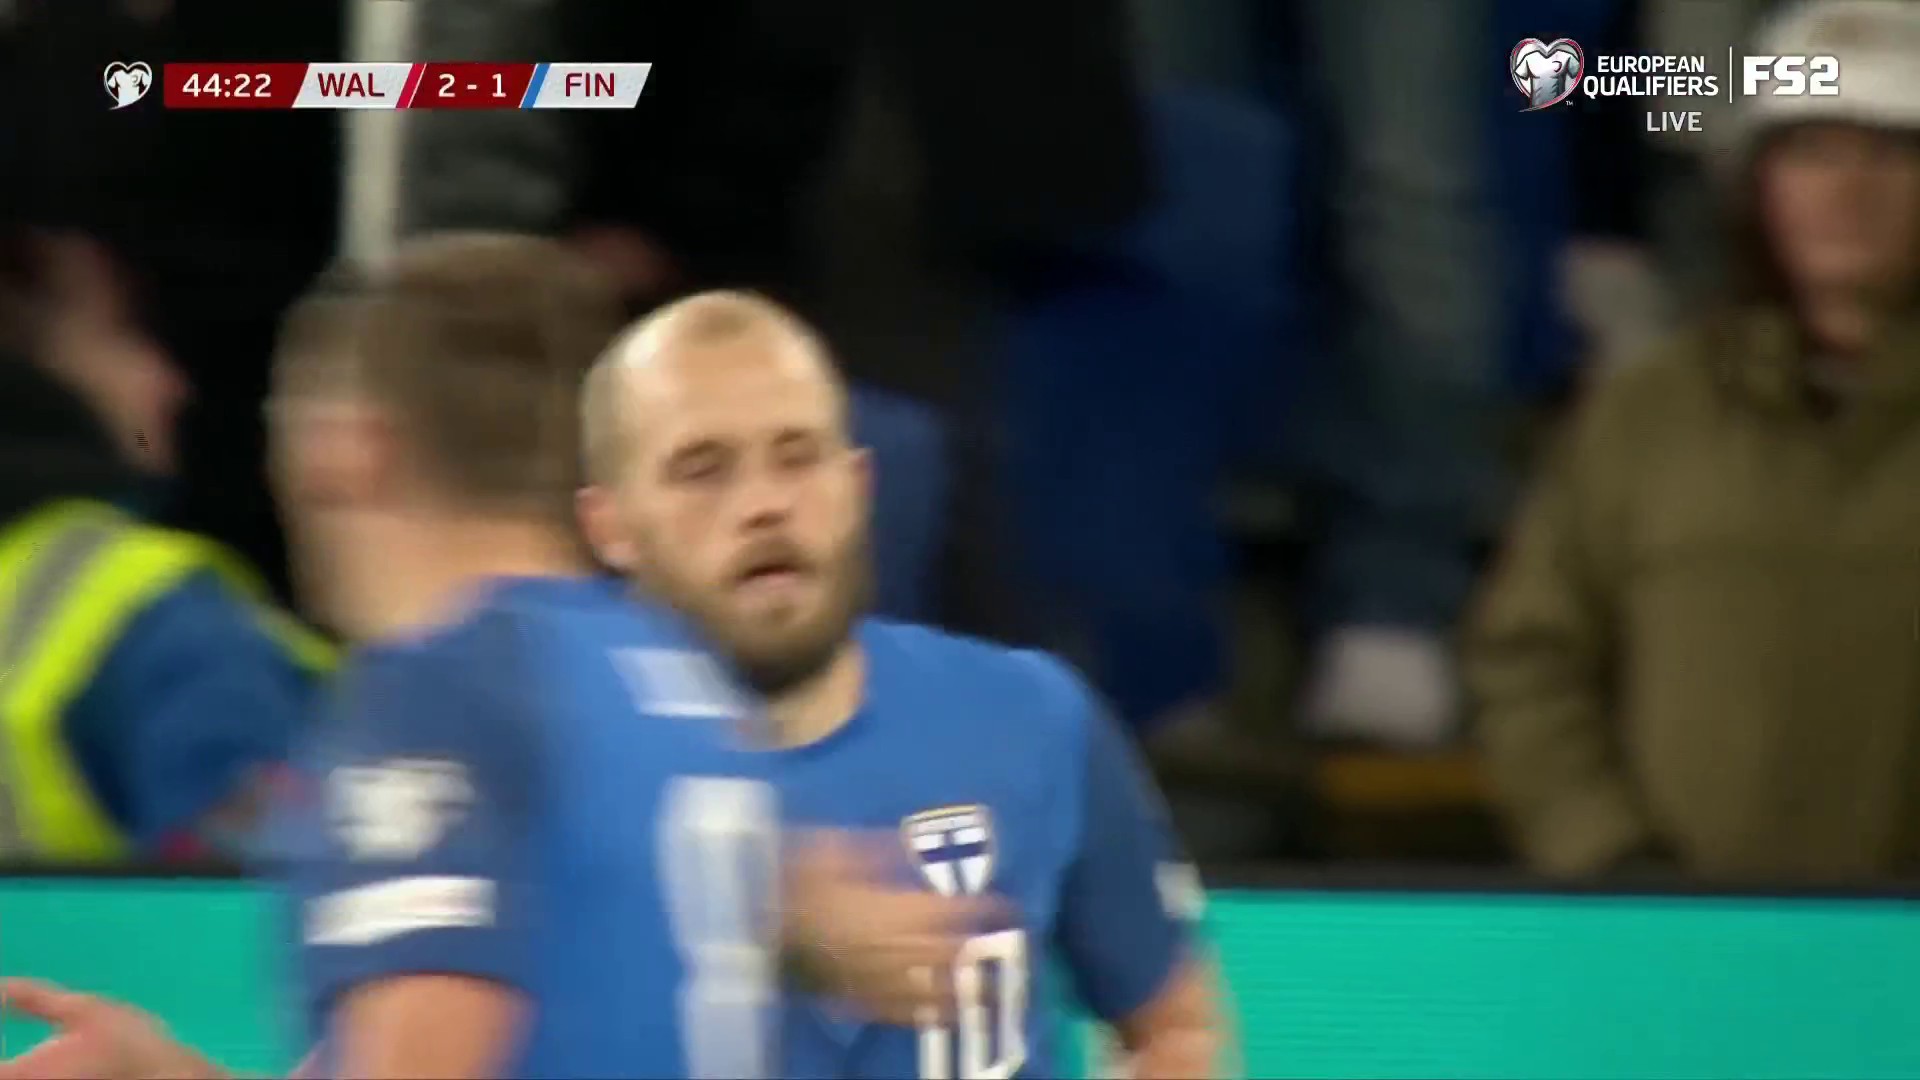 Pukki pulls a goal back for Finland! 🇫🇮